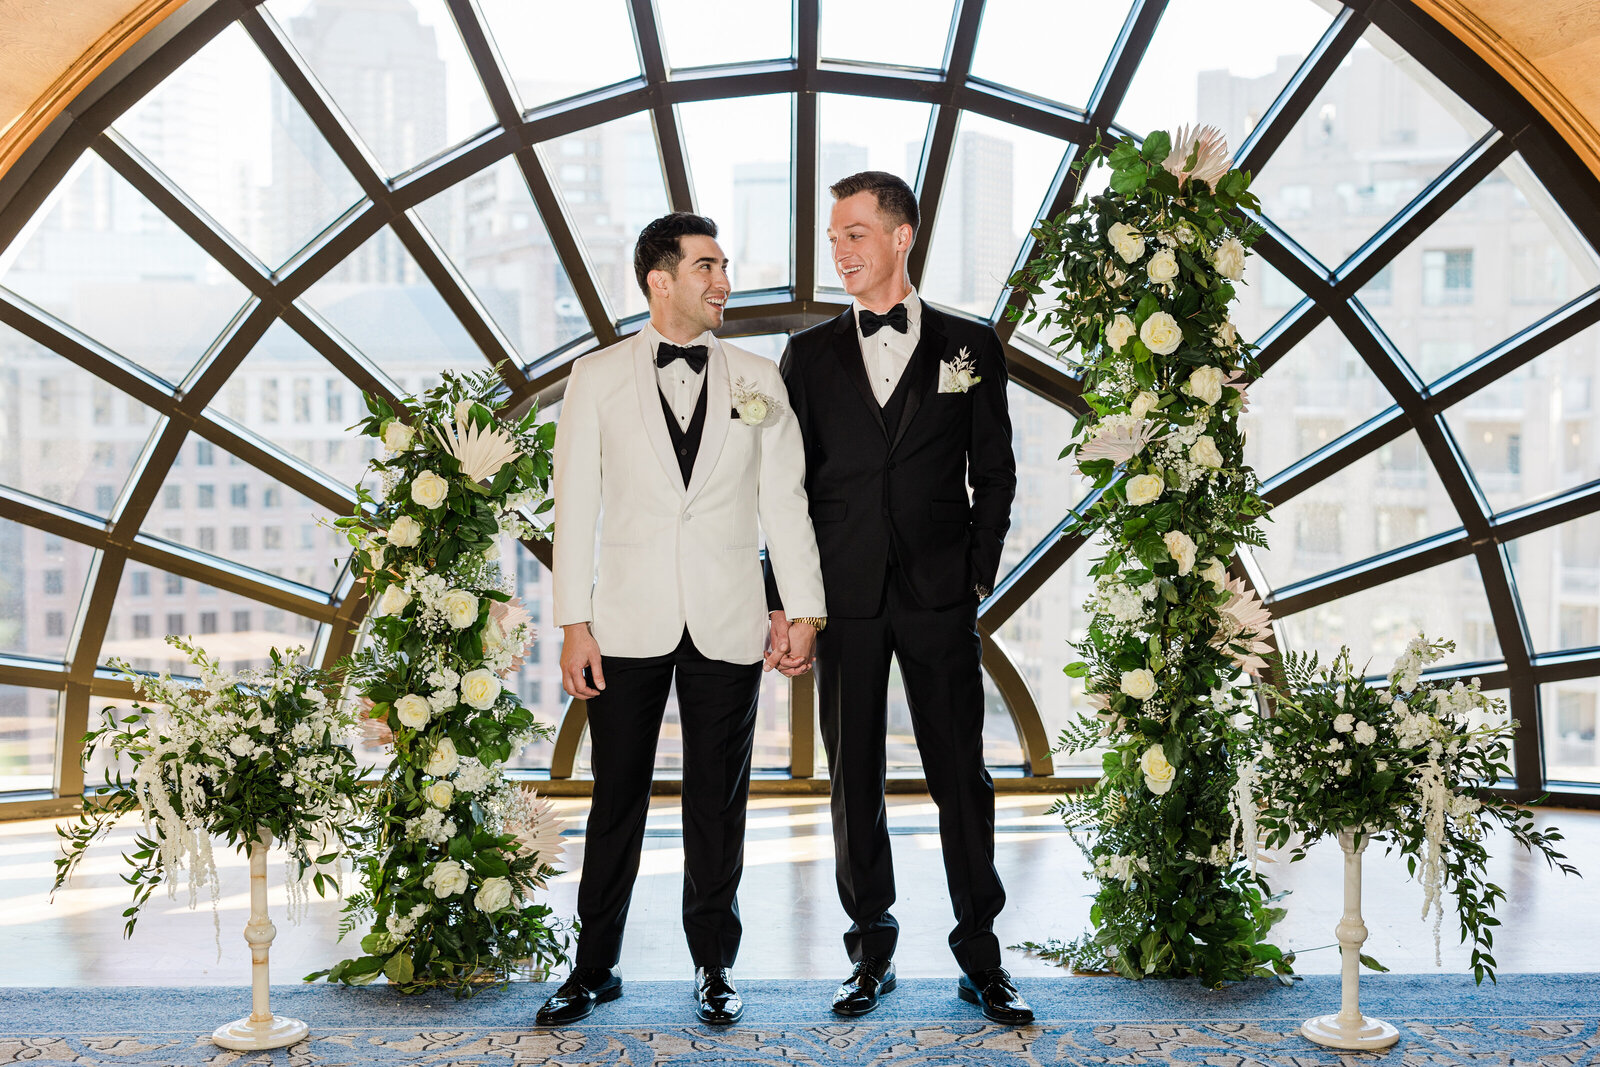 A gay couple on their wedding day stand in front of a white and greenery filled wedding arch in front of the iconic Dallas Crescent Court window. The grooms are wearing white and black tuxedos, and both have black bow ties. They are holding hands and smiling at each other.